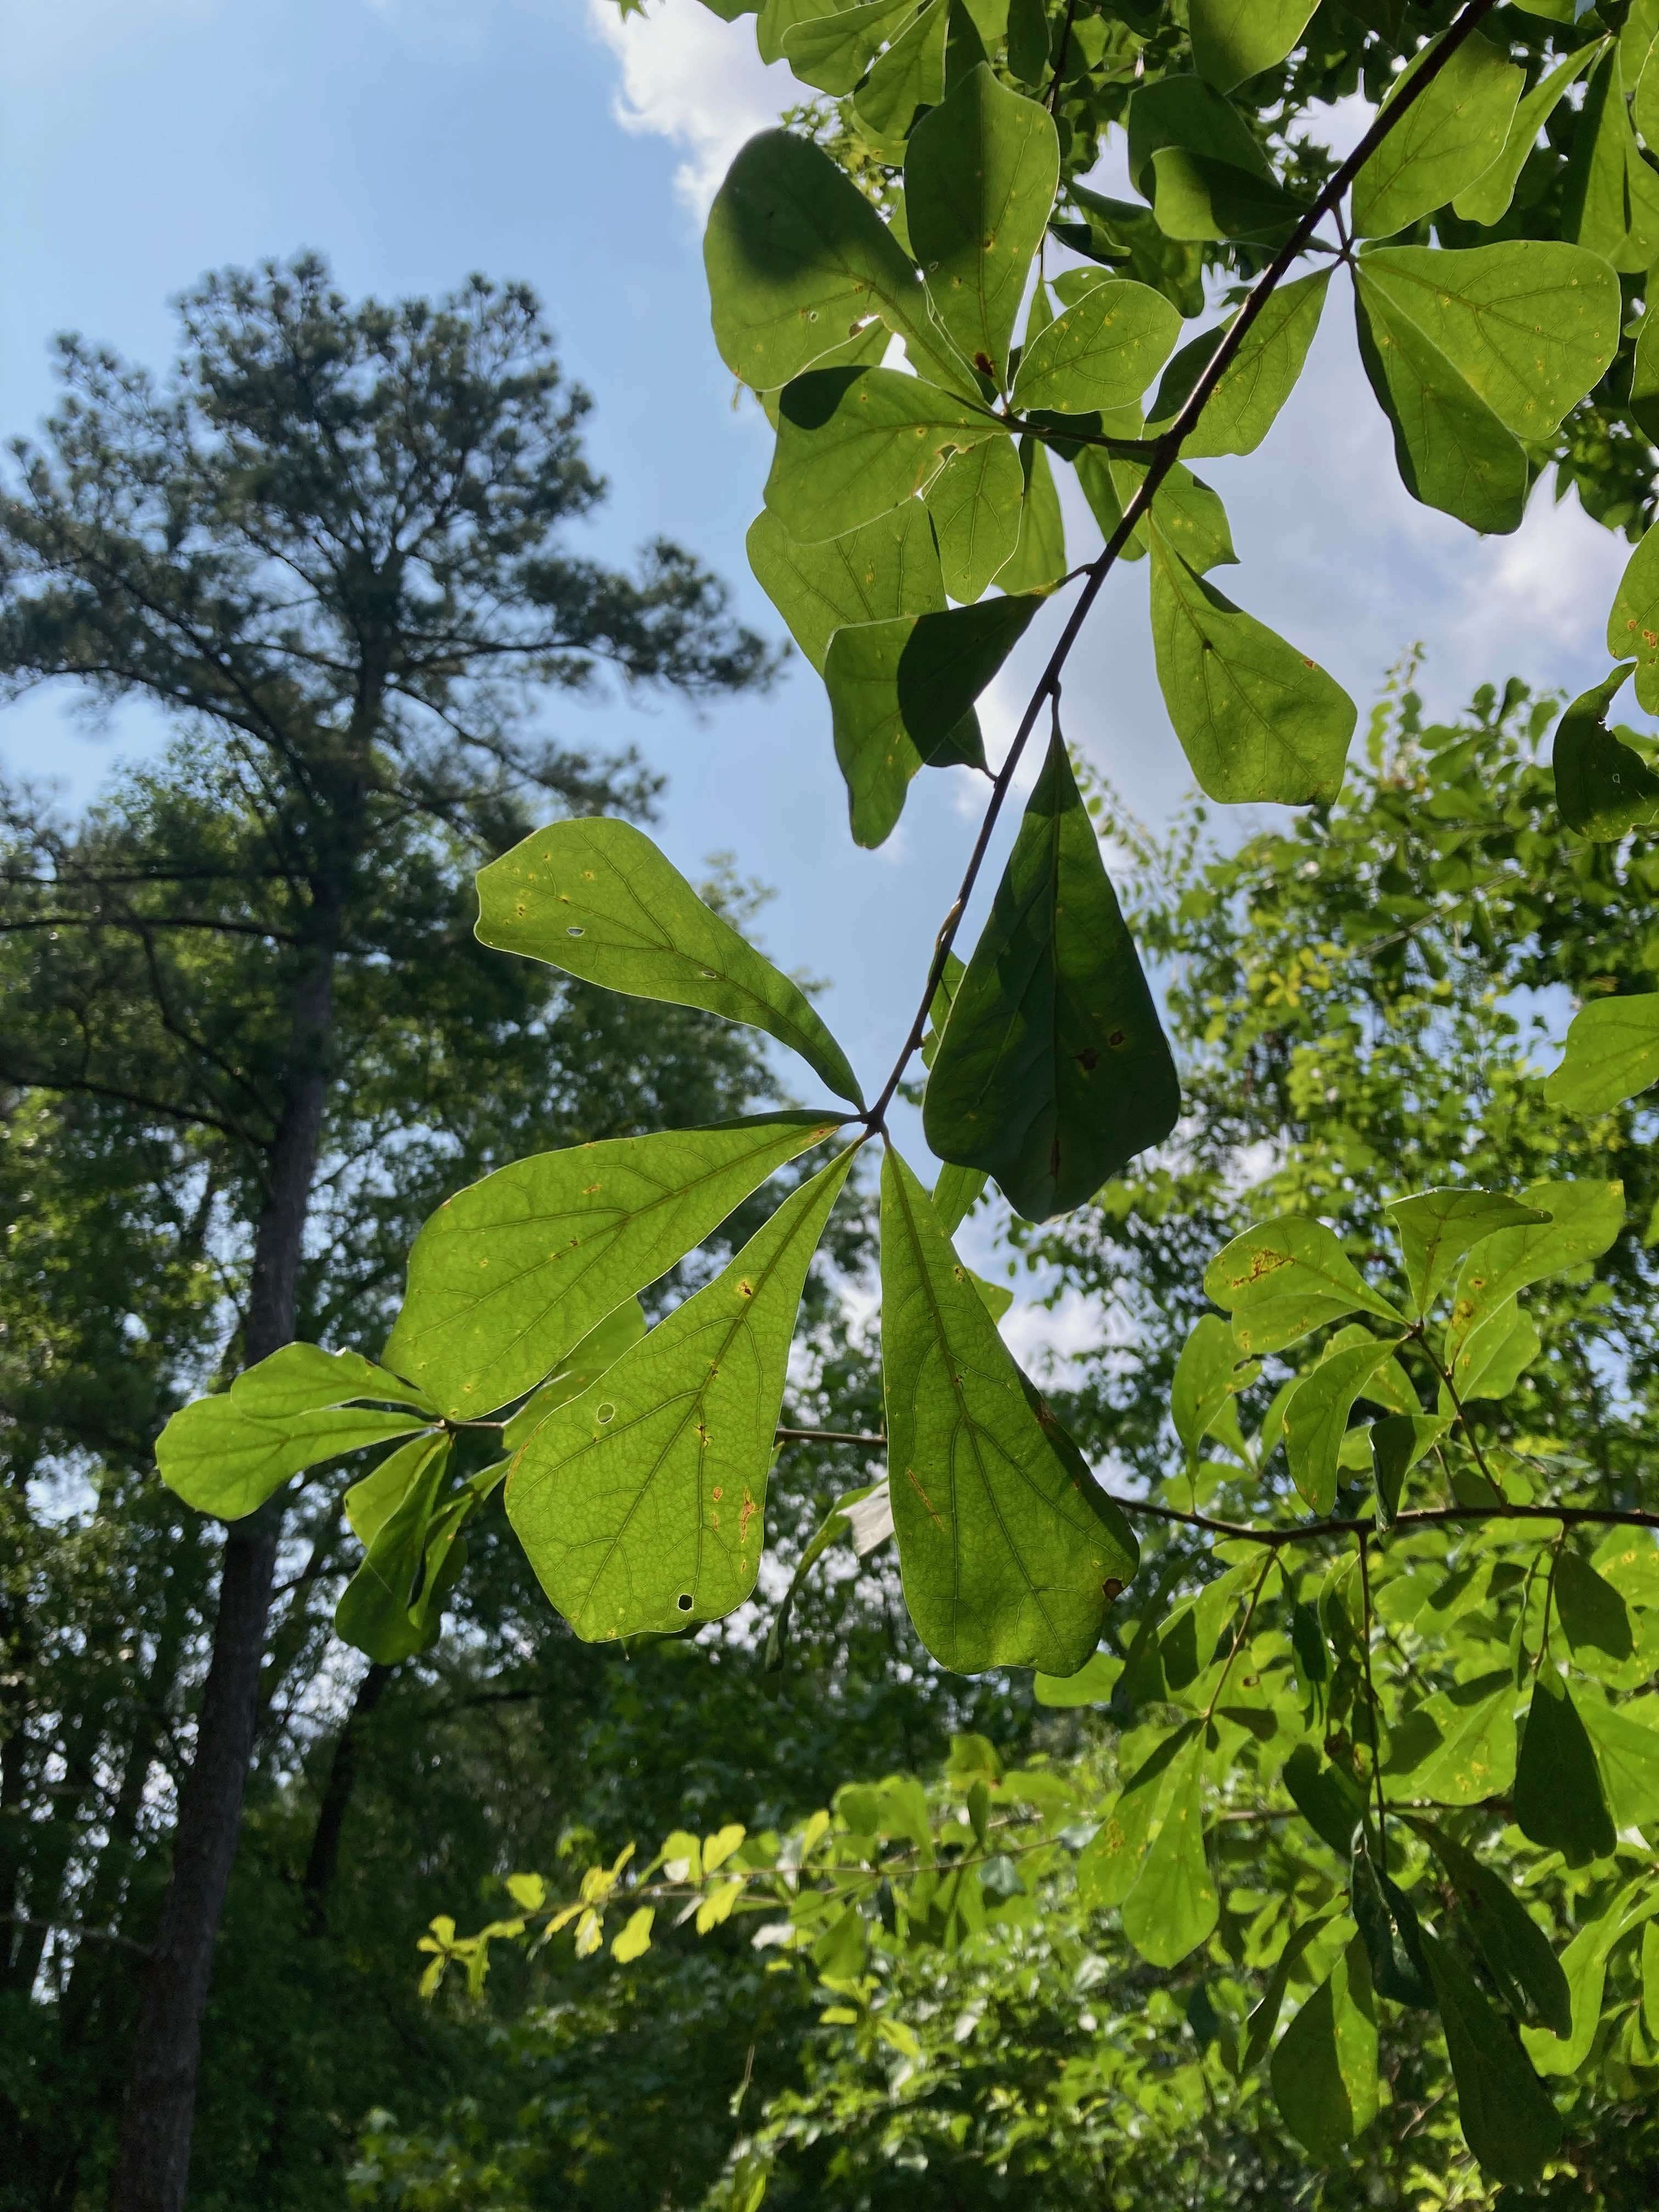 The Scientific Name is Quercus nigra. You will likely hear them called Water Oak, Paddle Oak. This picture shows the Bristle tips on the leaves are not obvious even though it is a member of the 